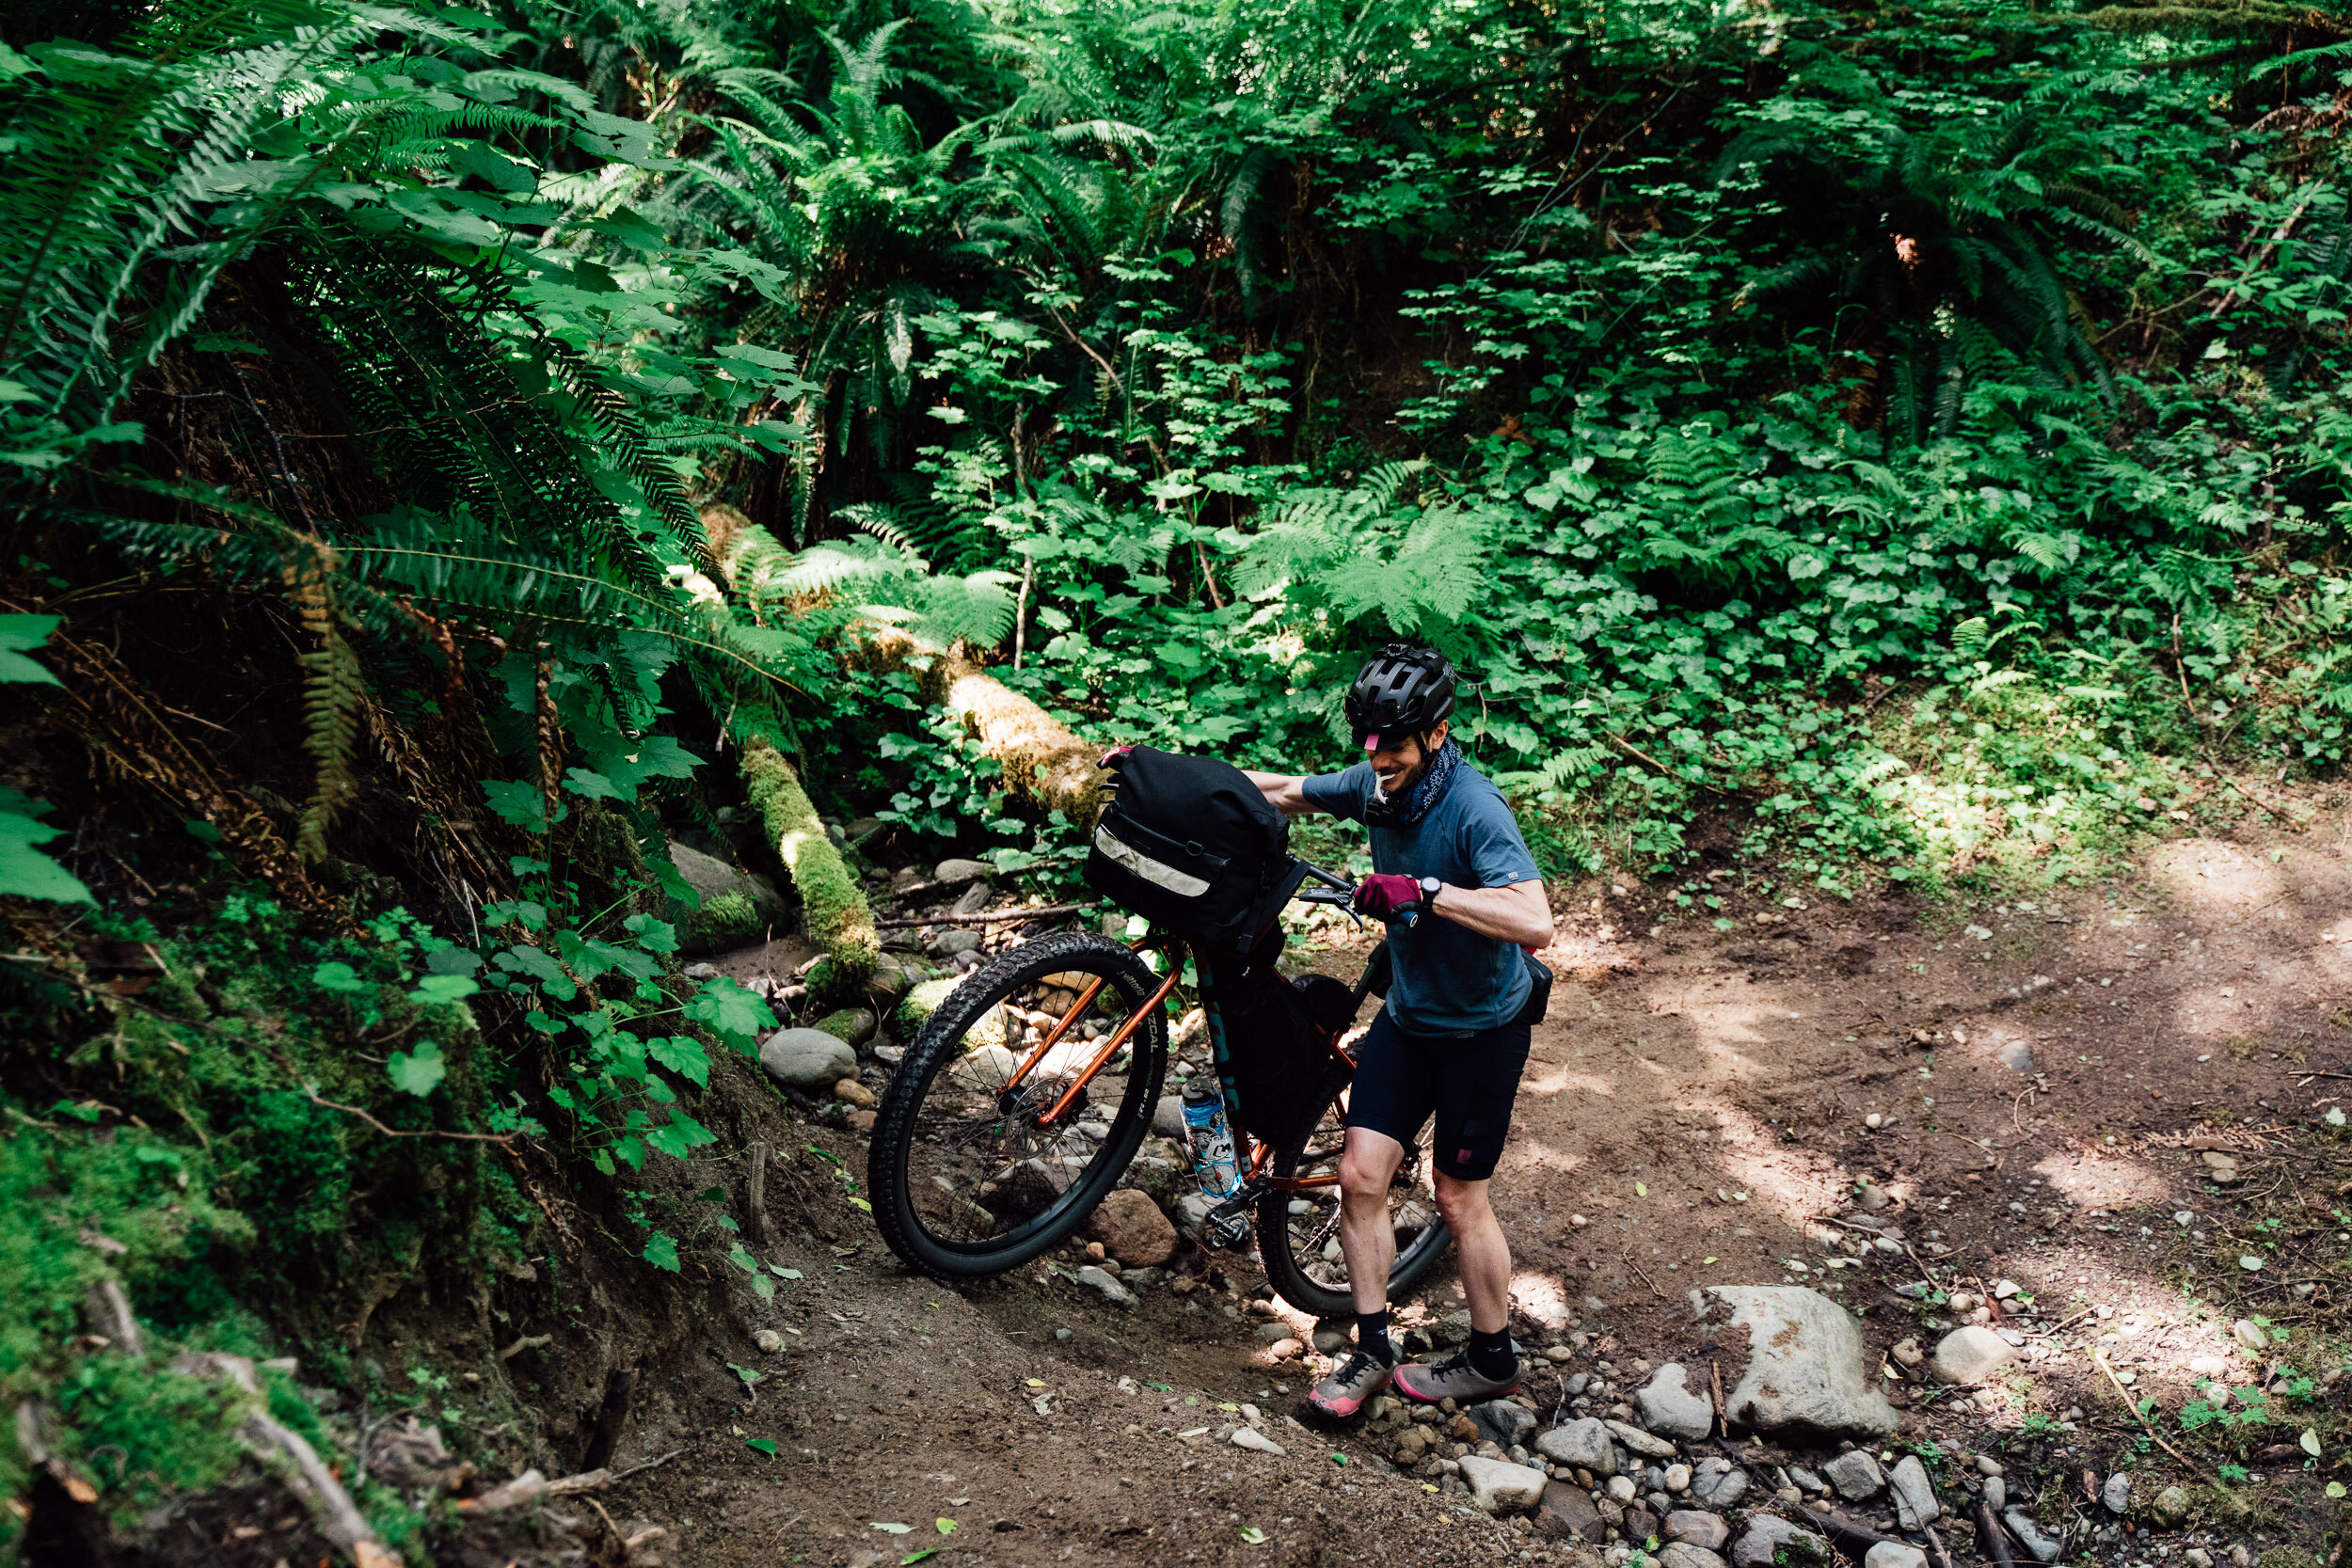  The trail quickly changed to an extremely rough single track that had us getting off the bikes often. This section from Cultus Lake to Chilliwack Lake would have been much better with a proper mountain bike. 